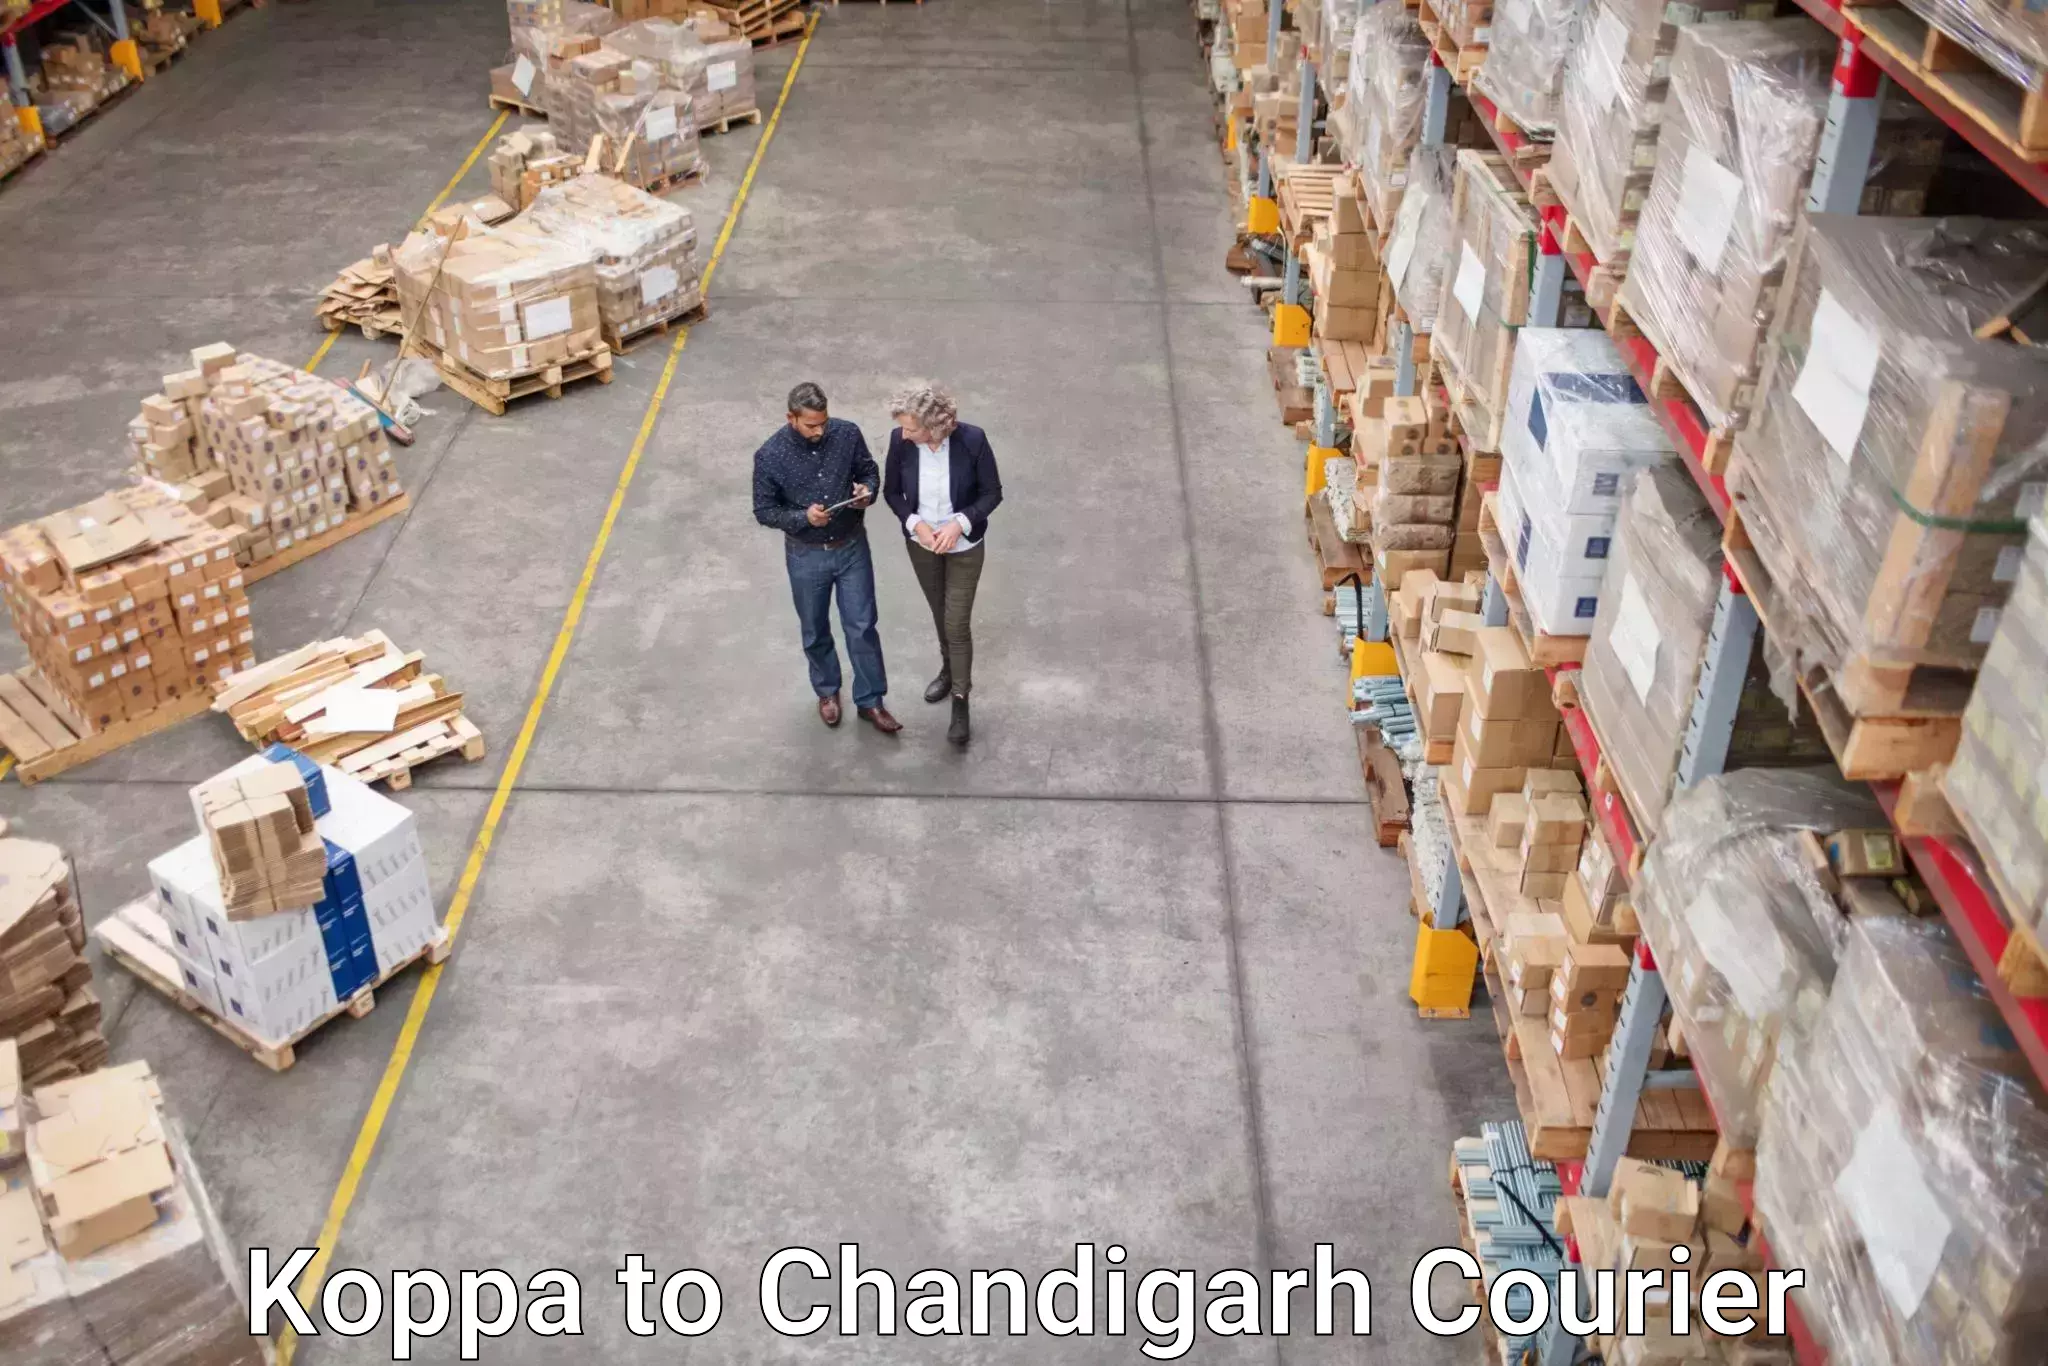 Next-day delivery options Koppa to Chandigarh